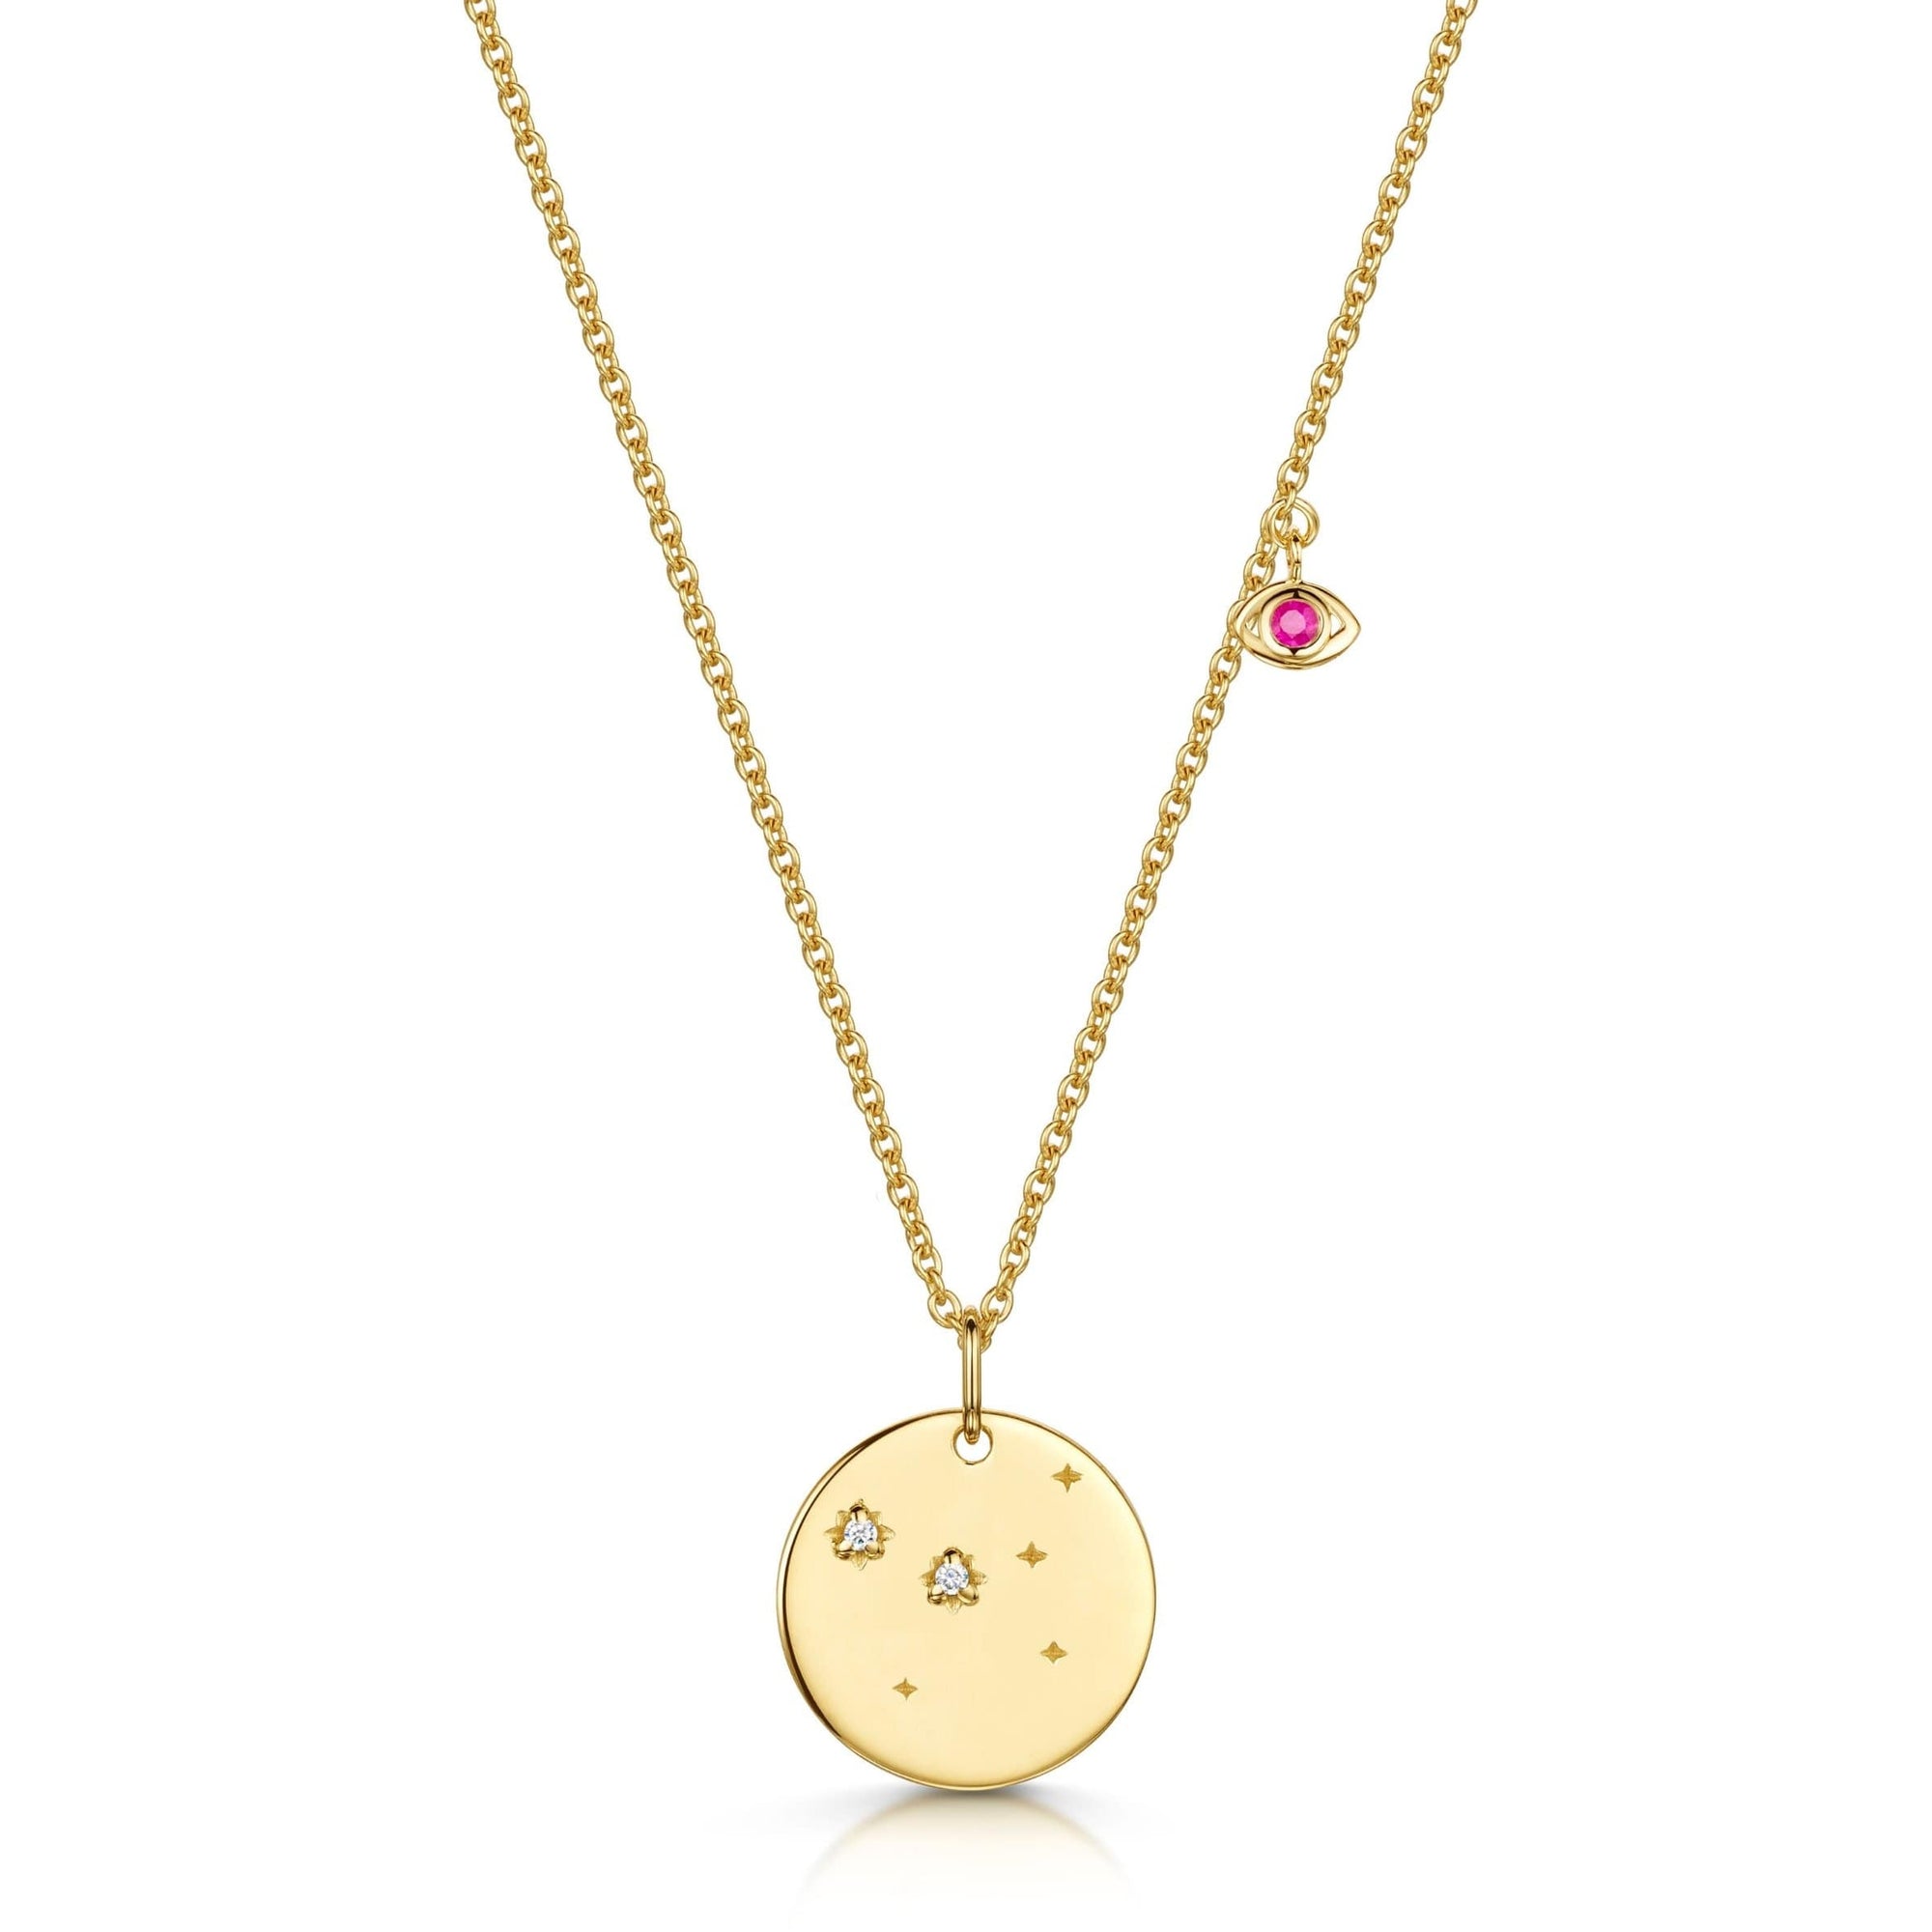 Fervor Montreal Necklace Cancer Double-Sided Zodiac & Constellation Necklace